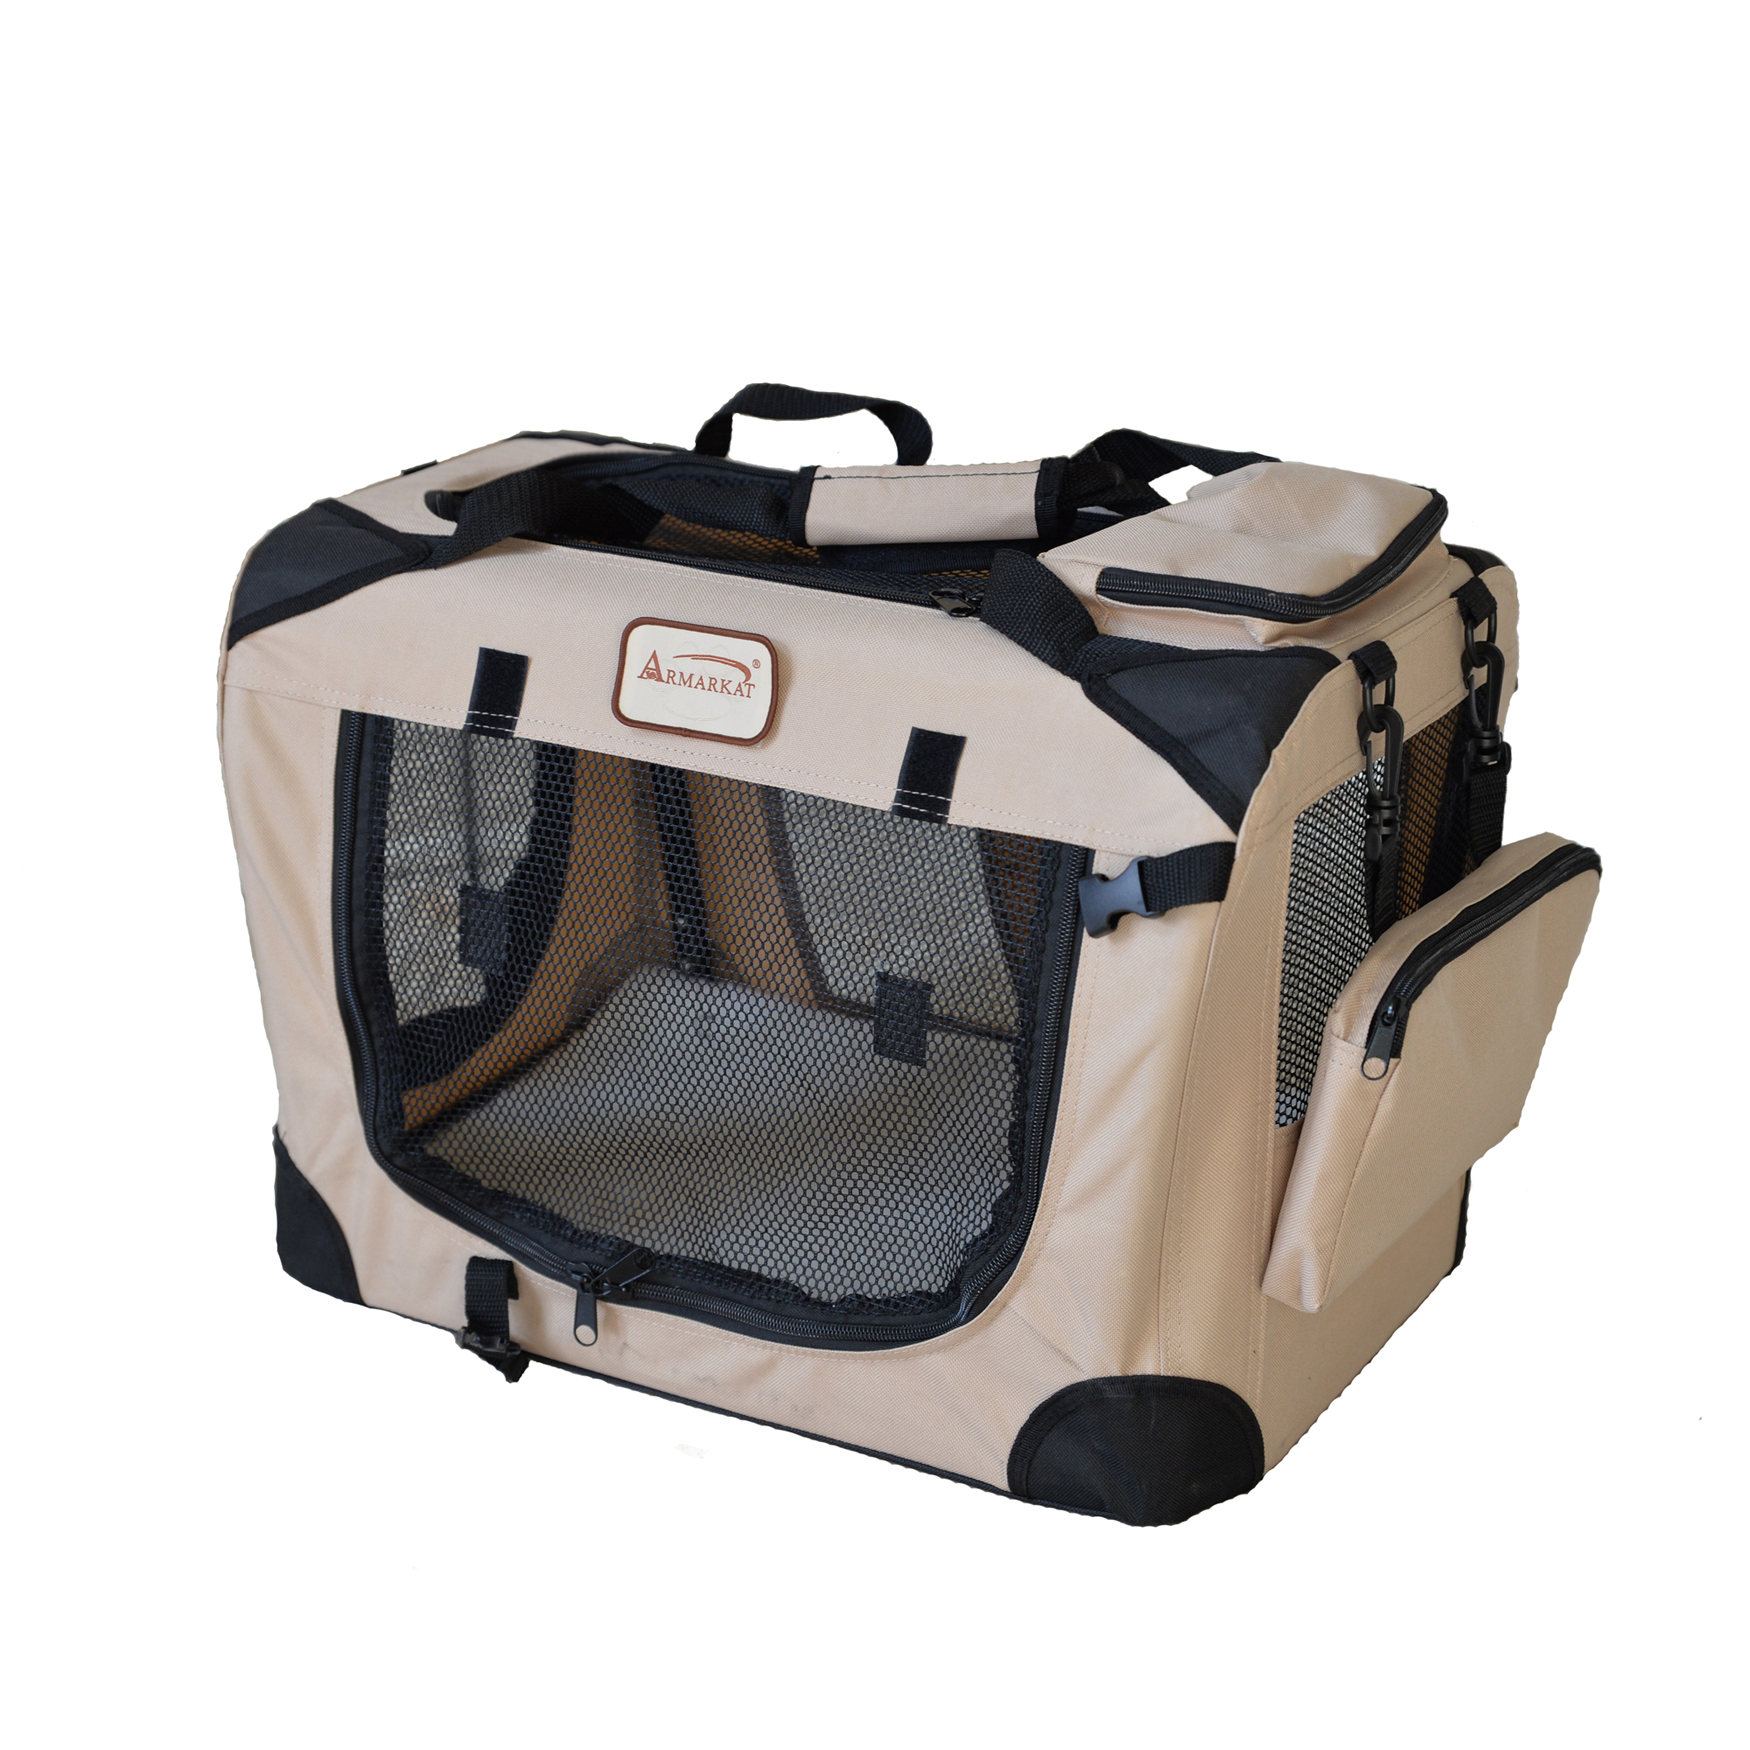 Folding Soft Dog Crate For Dogs And Cats, Pet Travel Carrier, BEIGE